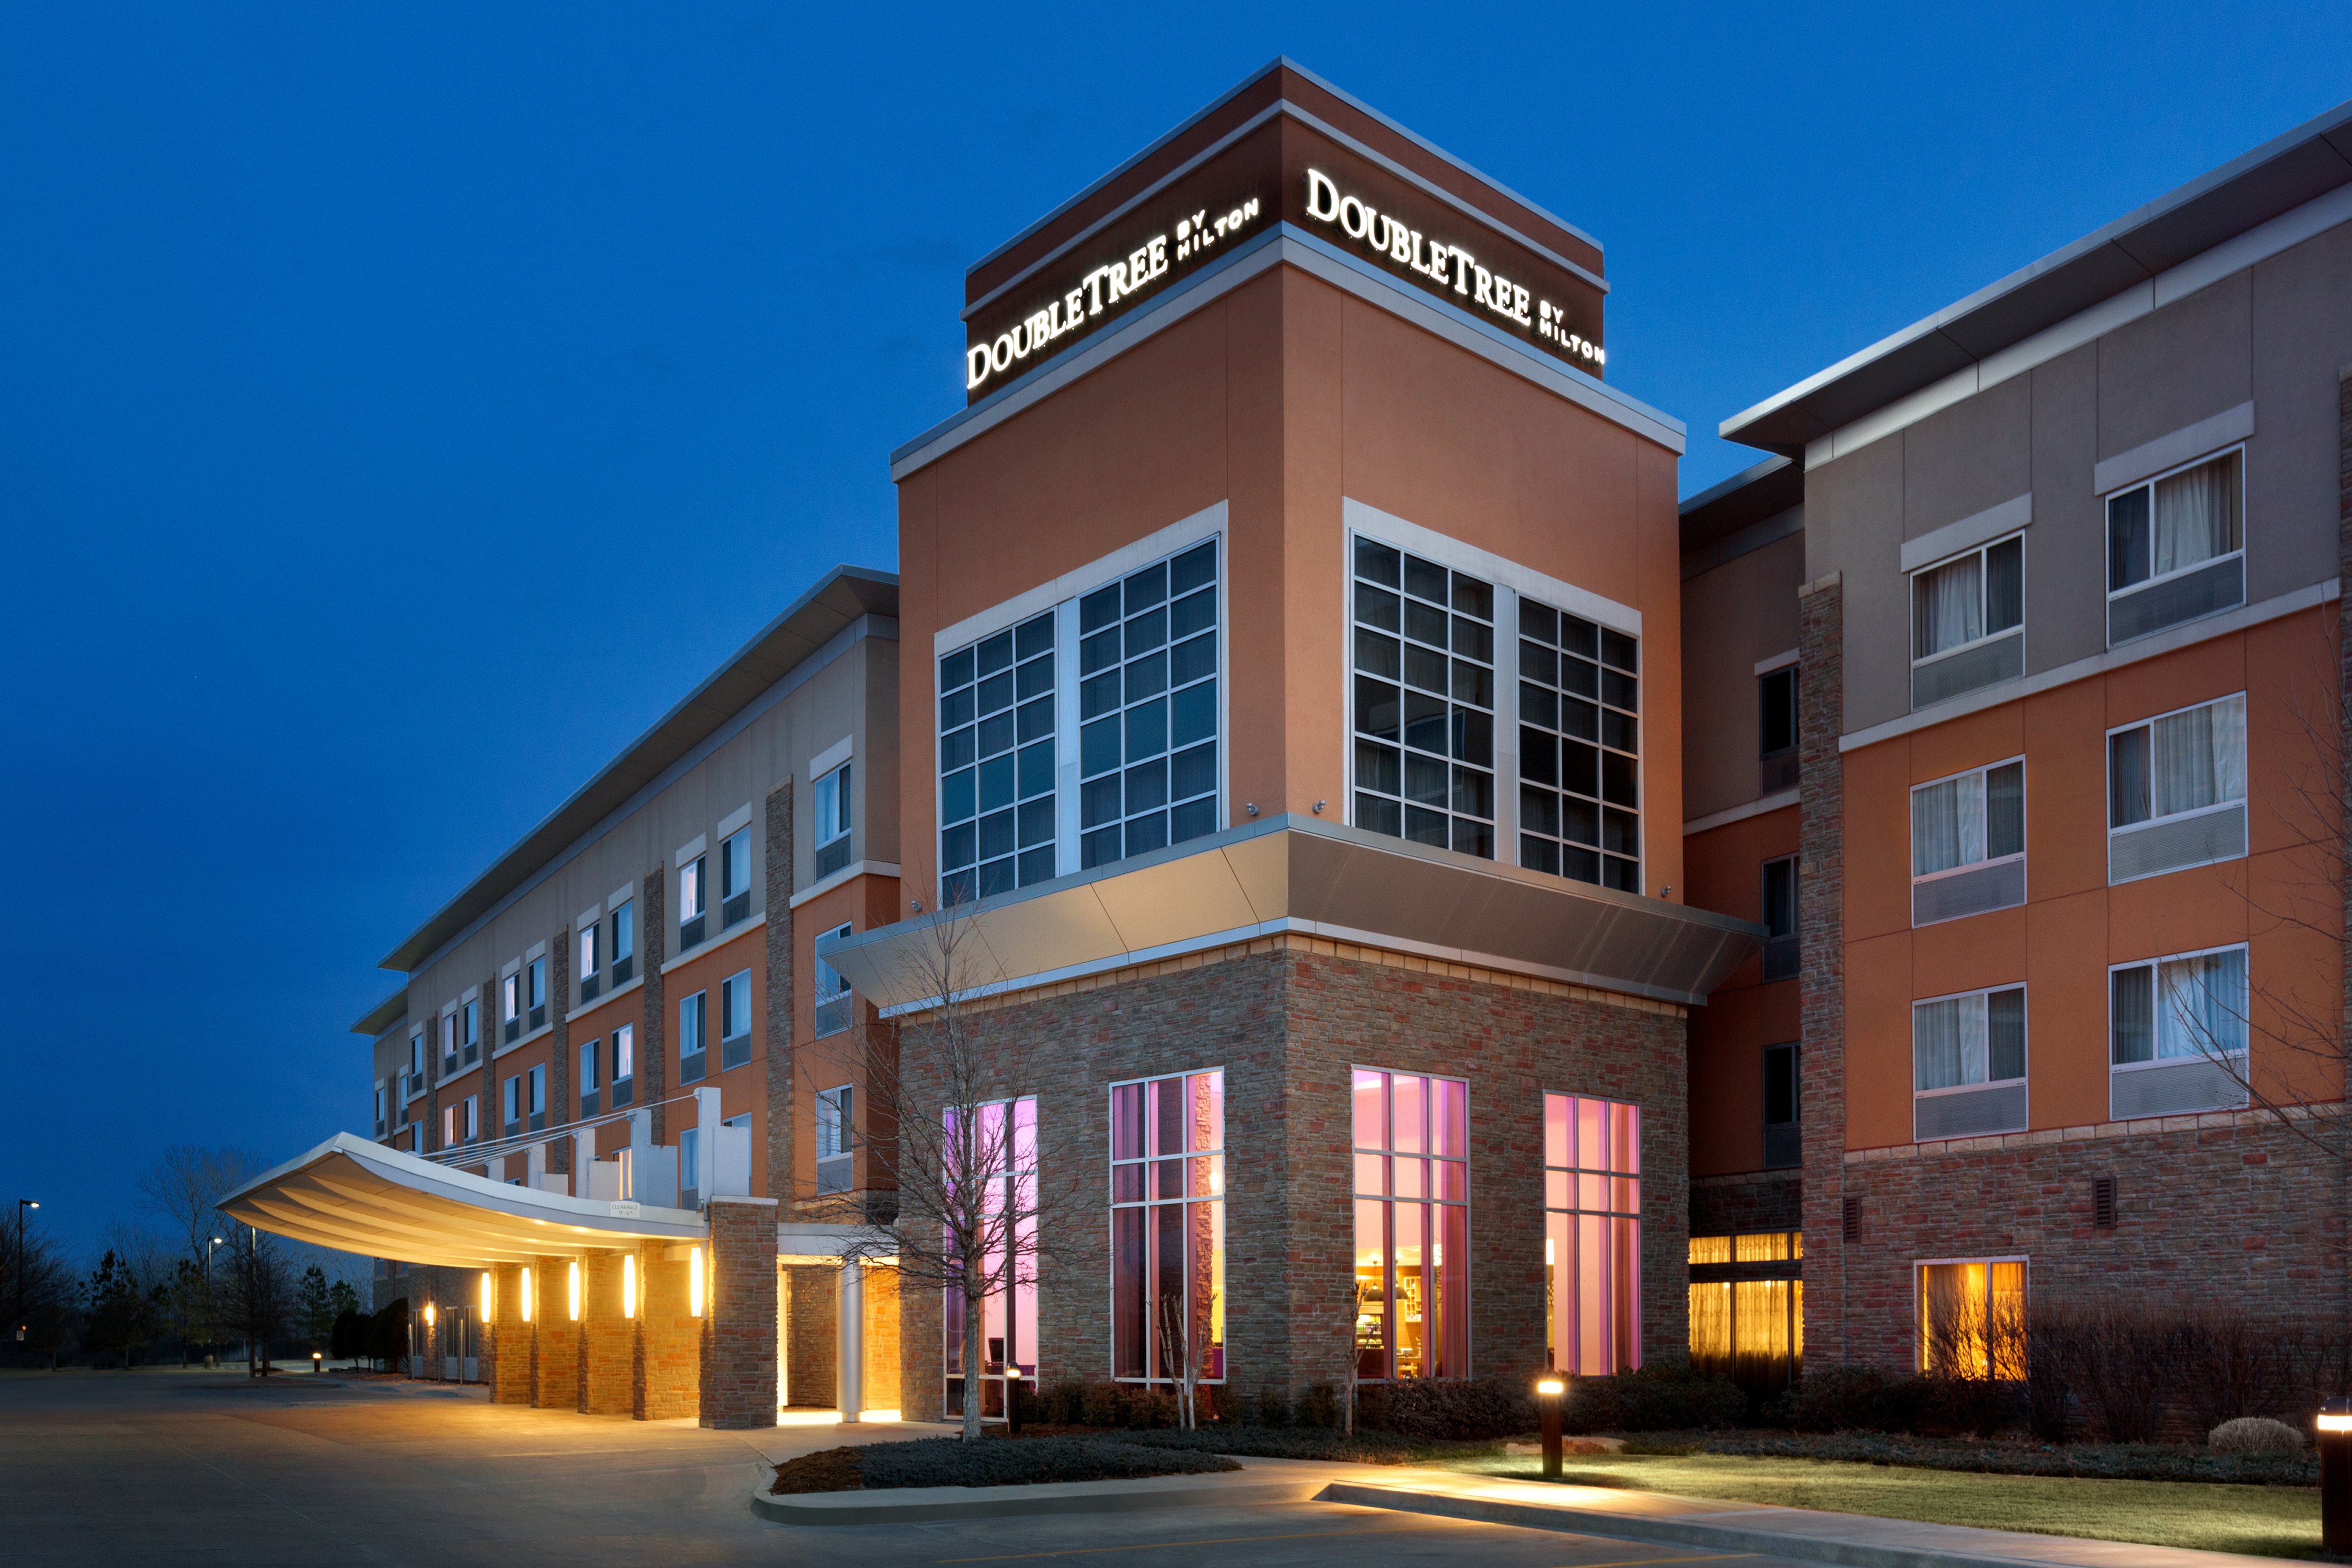 Illuminated Hotel Exterior, Signage, Porte Cochere, Landscaping, and Parking Lot at Dusk